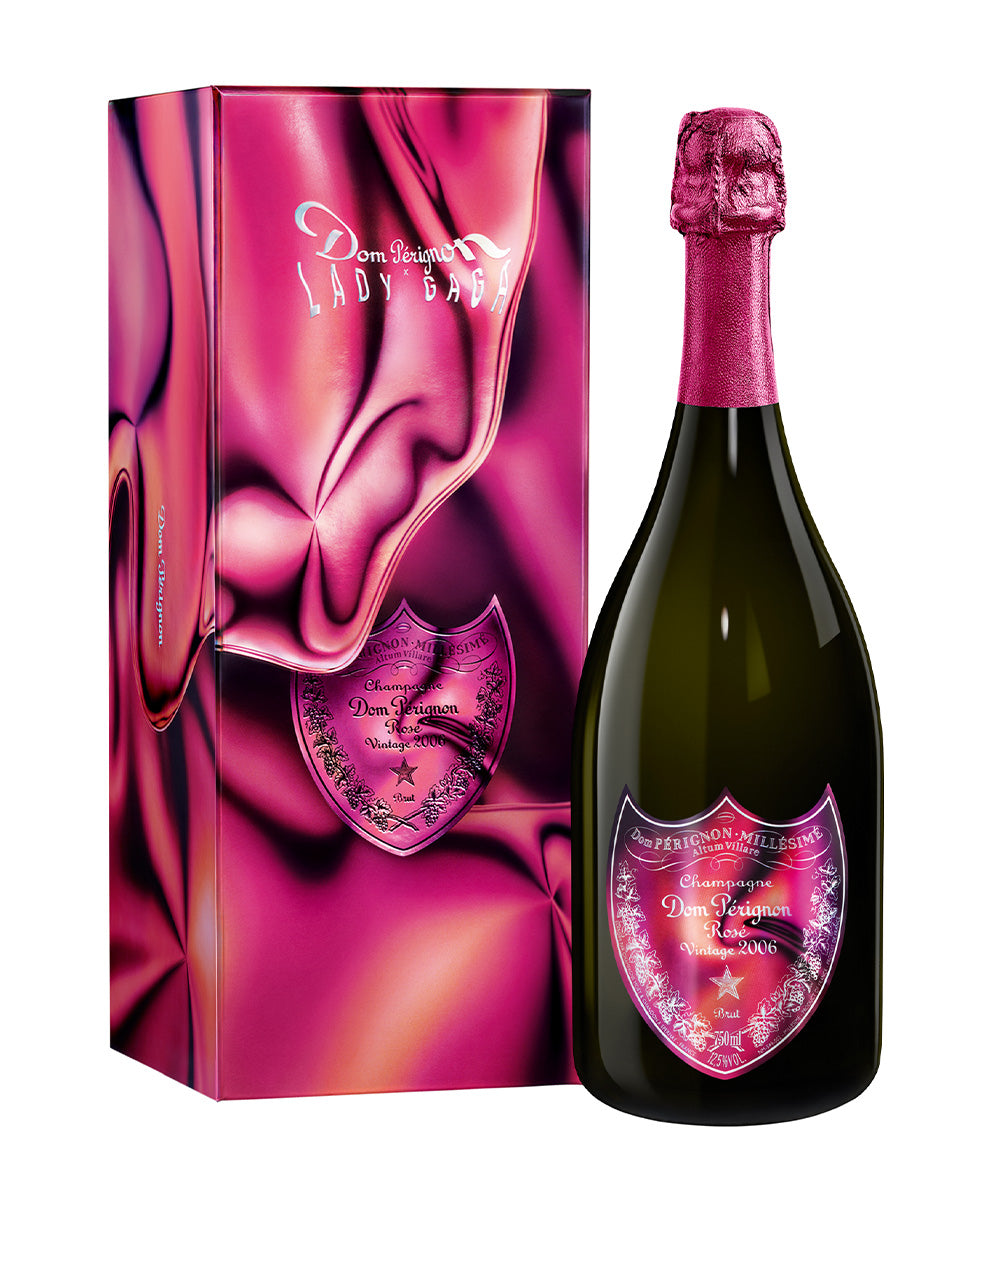 New Releases: Dom Perignon Lady Gaga limited edition Rose 2006 & Vintage  2010 - Buy Champagne same day 3 hour delivery